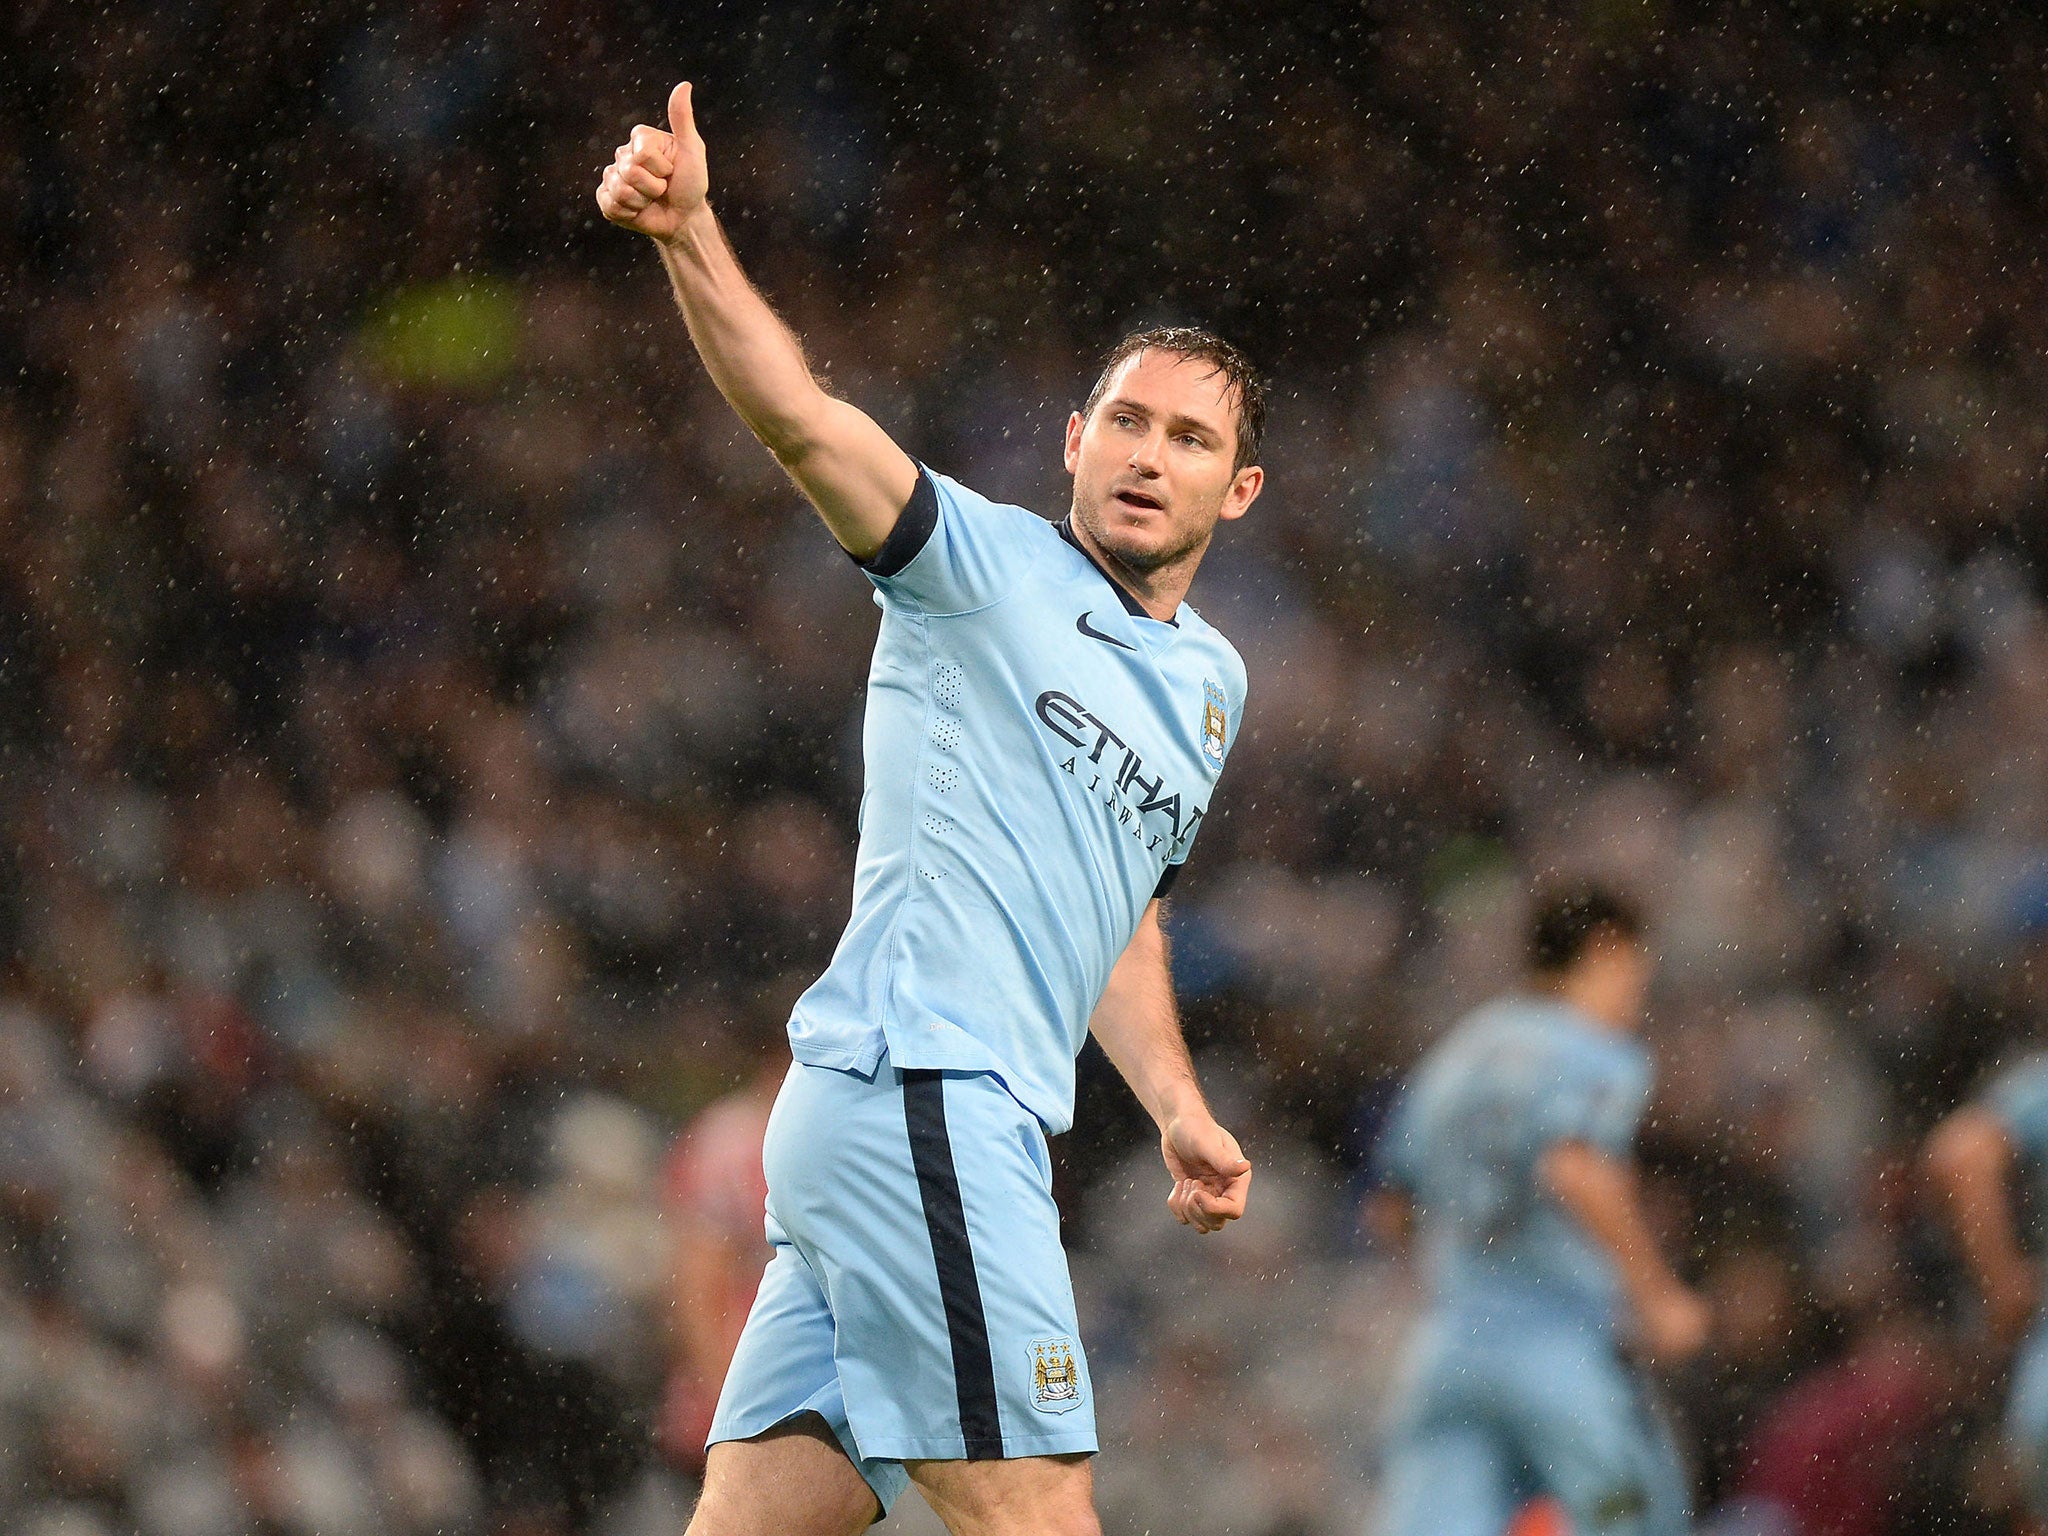 Manchester City's Frank Lampard celebrating scoring his sides third goal of the game during the Barclays Premier League match at the Etihad Stadium, Manchester